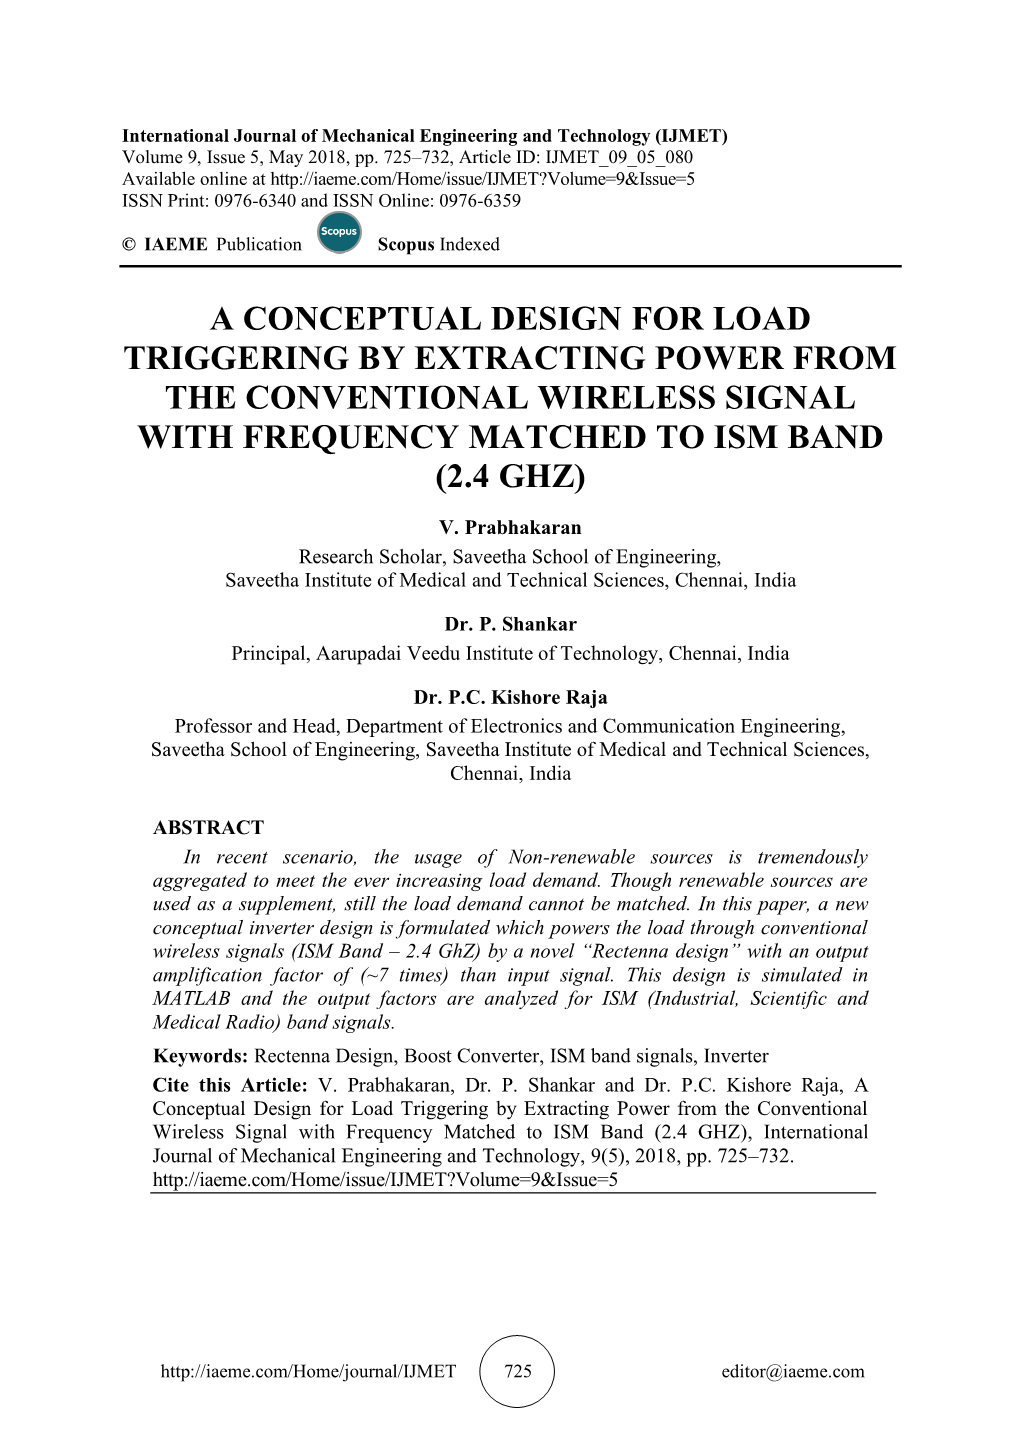 A Conceptual Design for Load Triggering by Extracting Power from the Conventional Wireless Signal with Frequency Matched to Ism Band (2.4 Ghz)